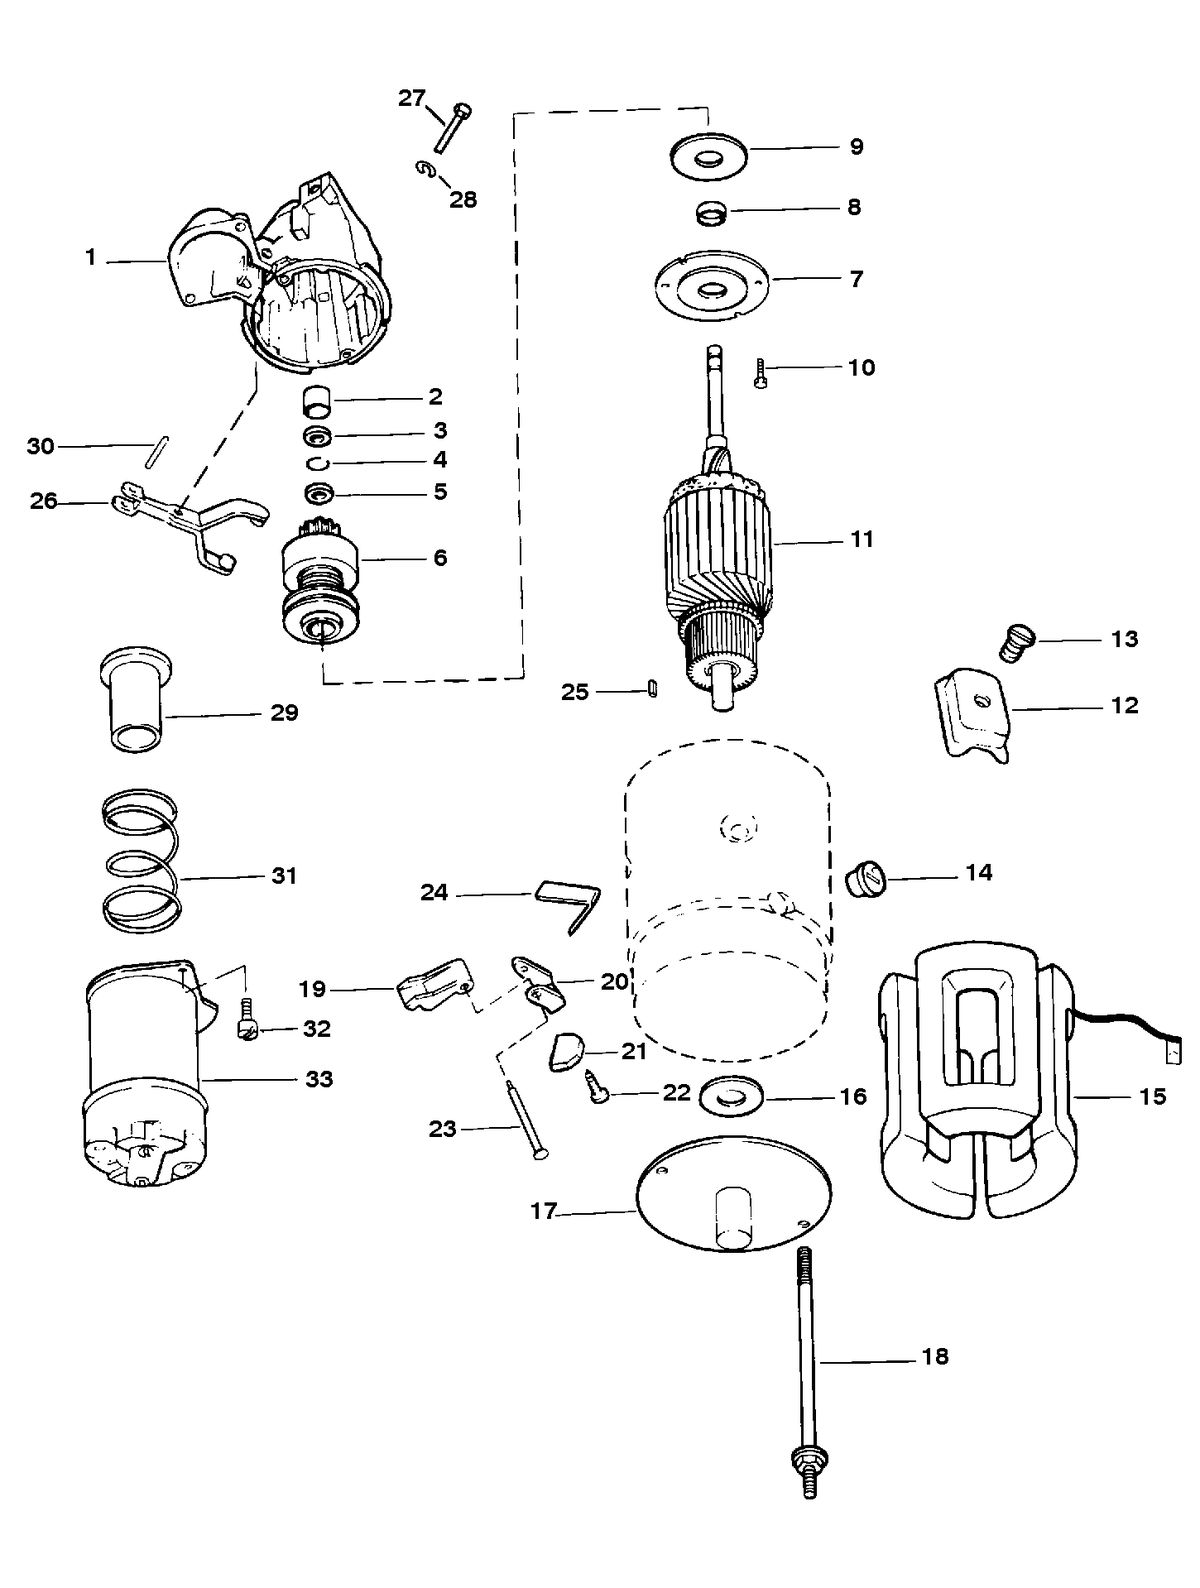 RACE STERNDRIVE 500 H.P. 8.2L (502 CI) ENGINE STARTER ASSEMBLY (50-99418A2) (3.500 IN. DIA. END CAP)